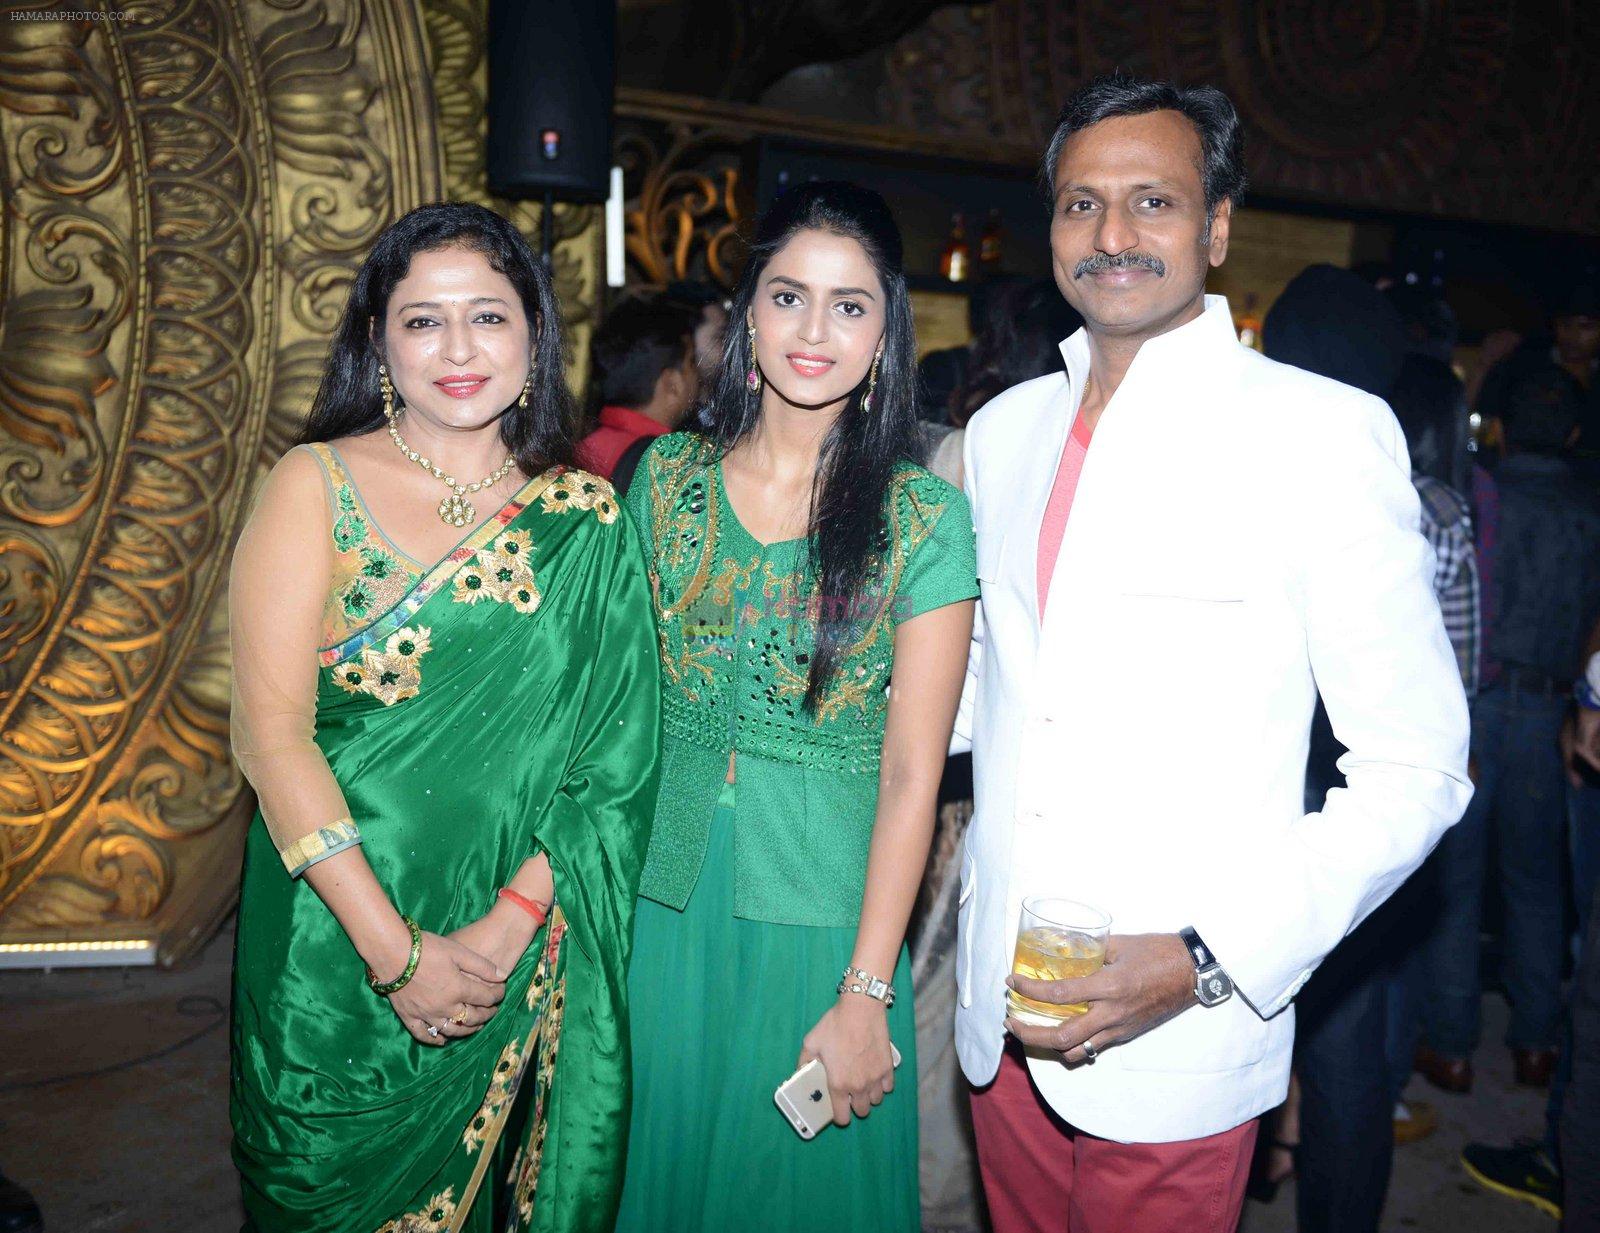 Jewellery Desiger Nitin gupta with family at Cancer Society of Hope fashion show in Delhi on 15th Nov 2015